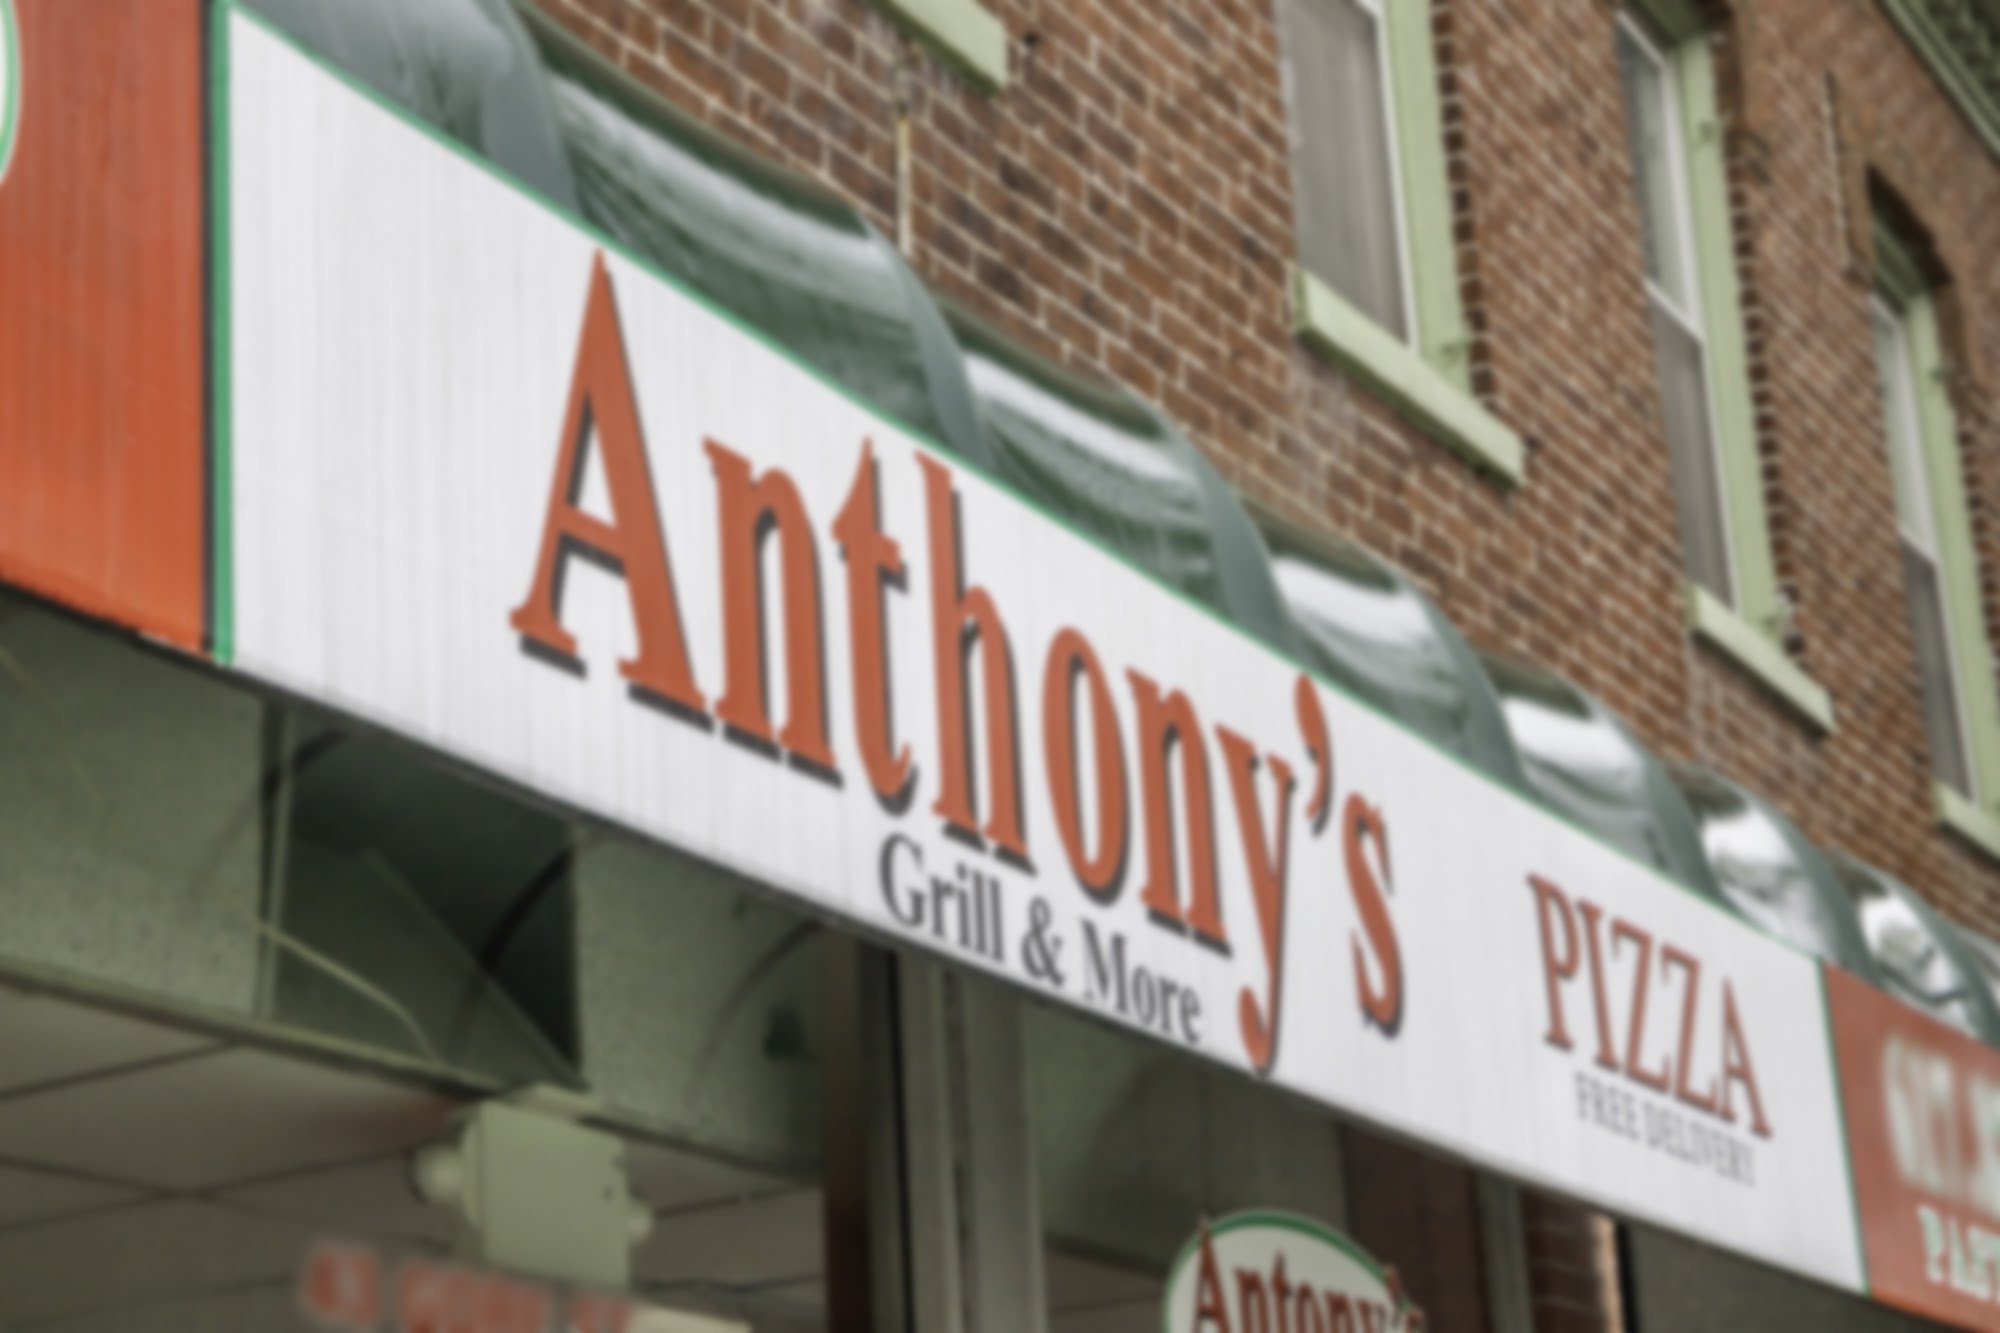 Anthony's Pizza Grill and More